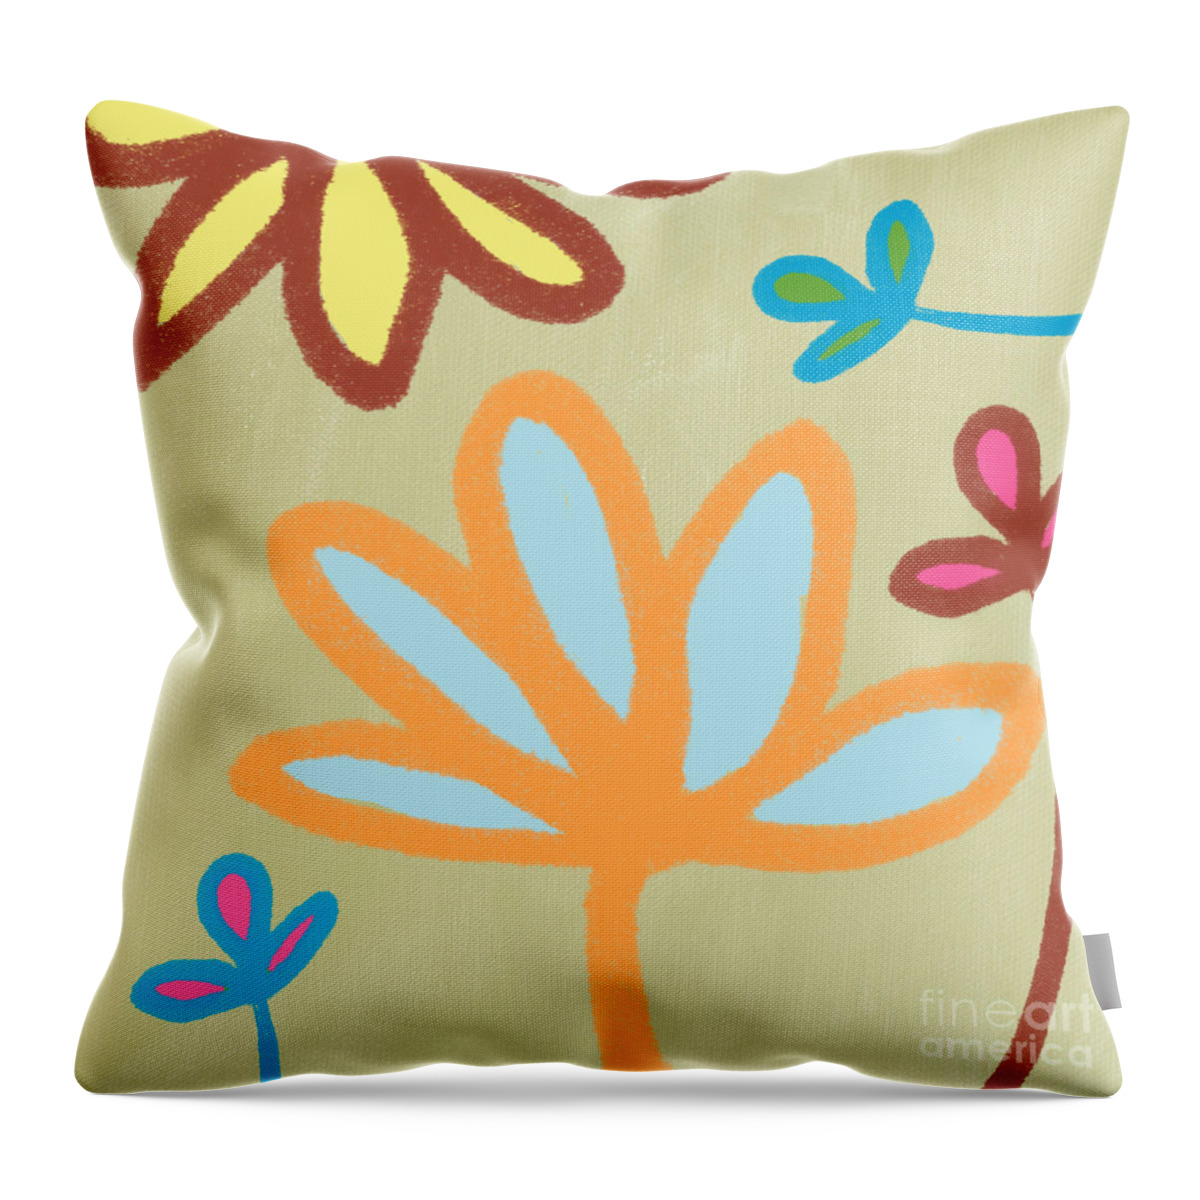 Garden Throw Pillow featuring the painting Bali Garden by Linda Woods